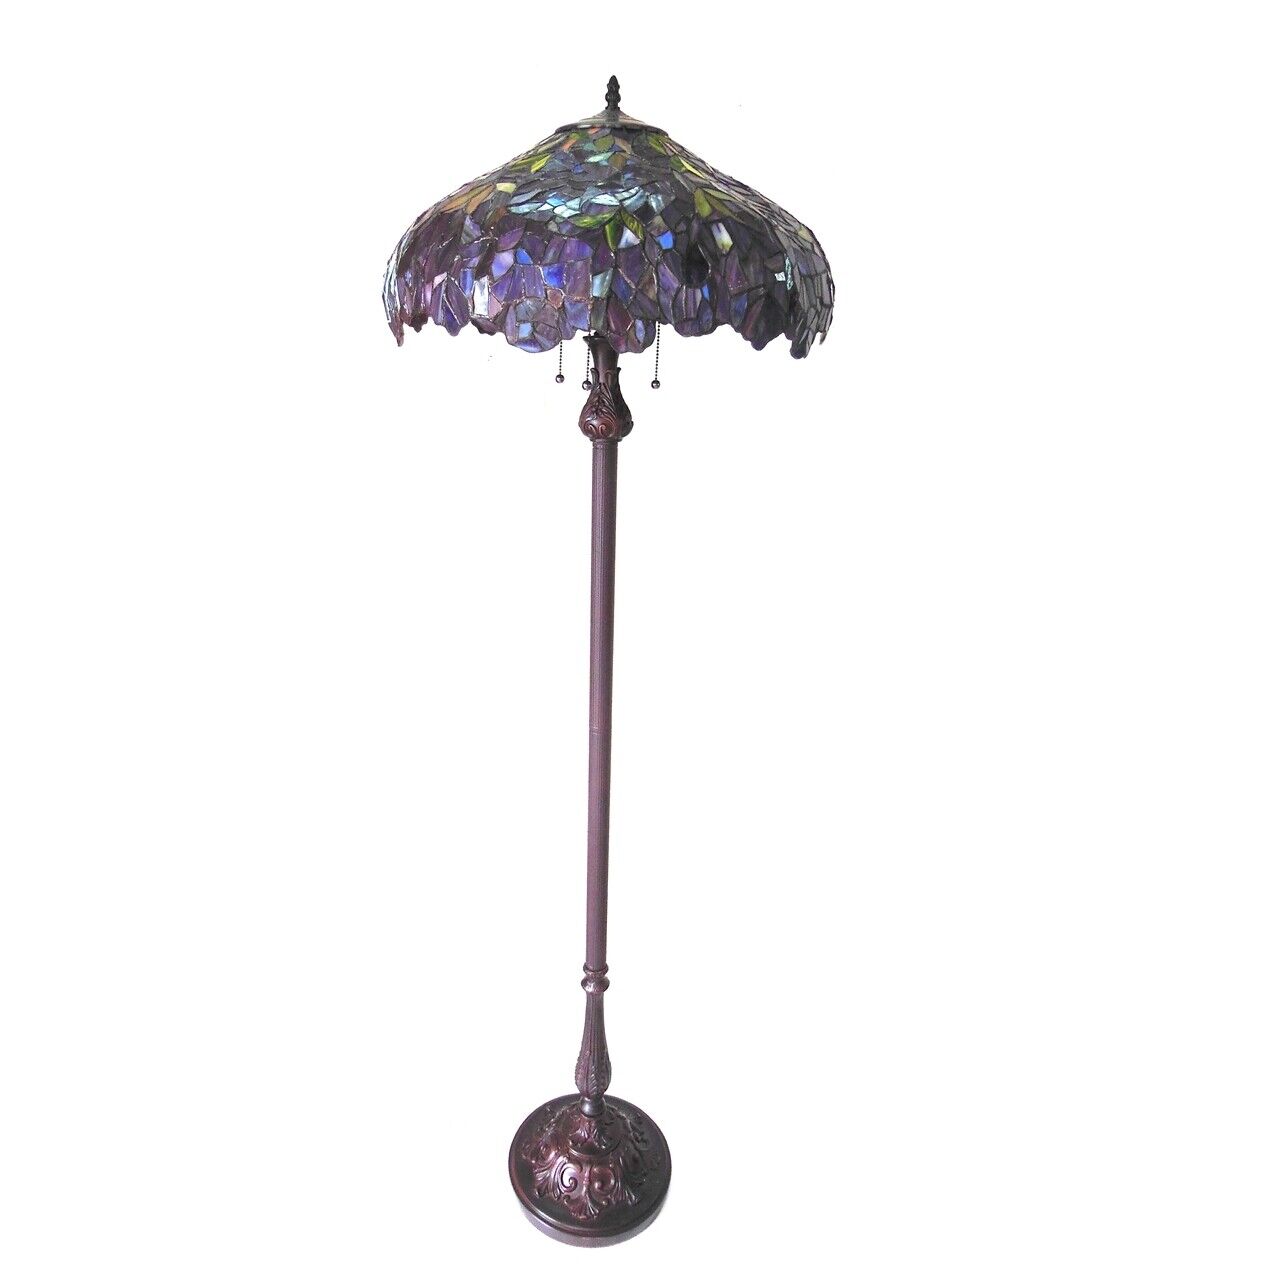 64" Antique Style Wisteria Stained Glass Pull Chain Floor Lamp